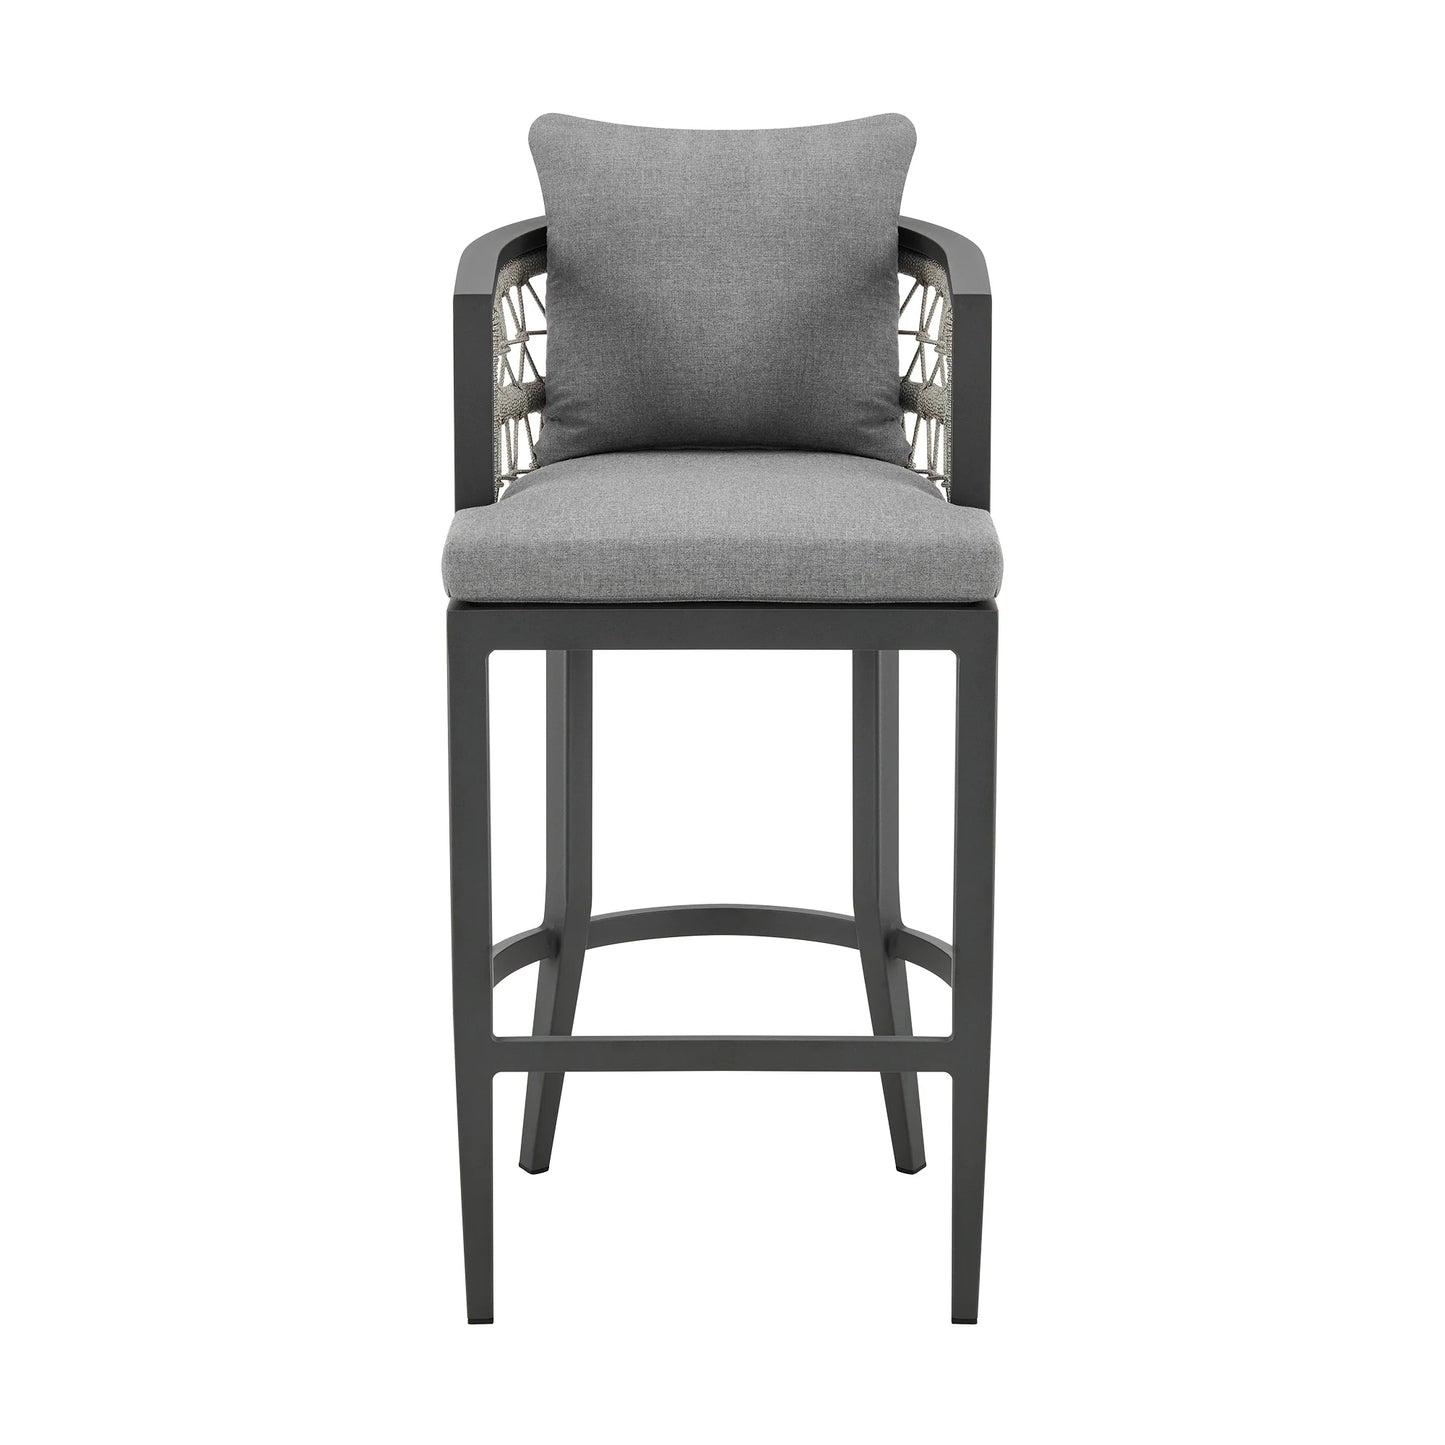 Zella Outdoor Patio Counter Stool in Aluminum with Light Gray Rope and Earl Gray Cushions